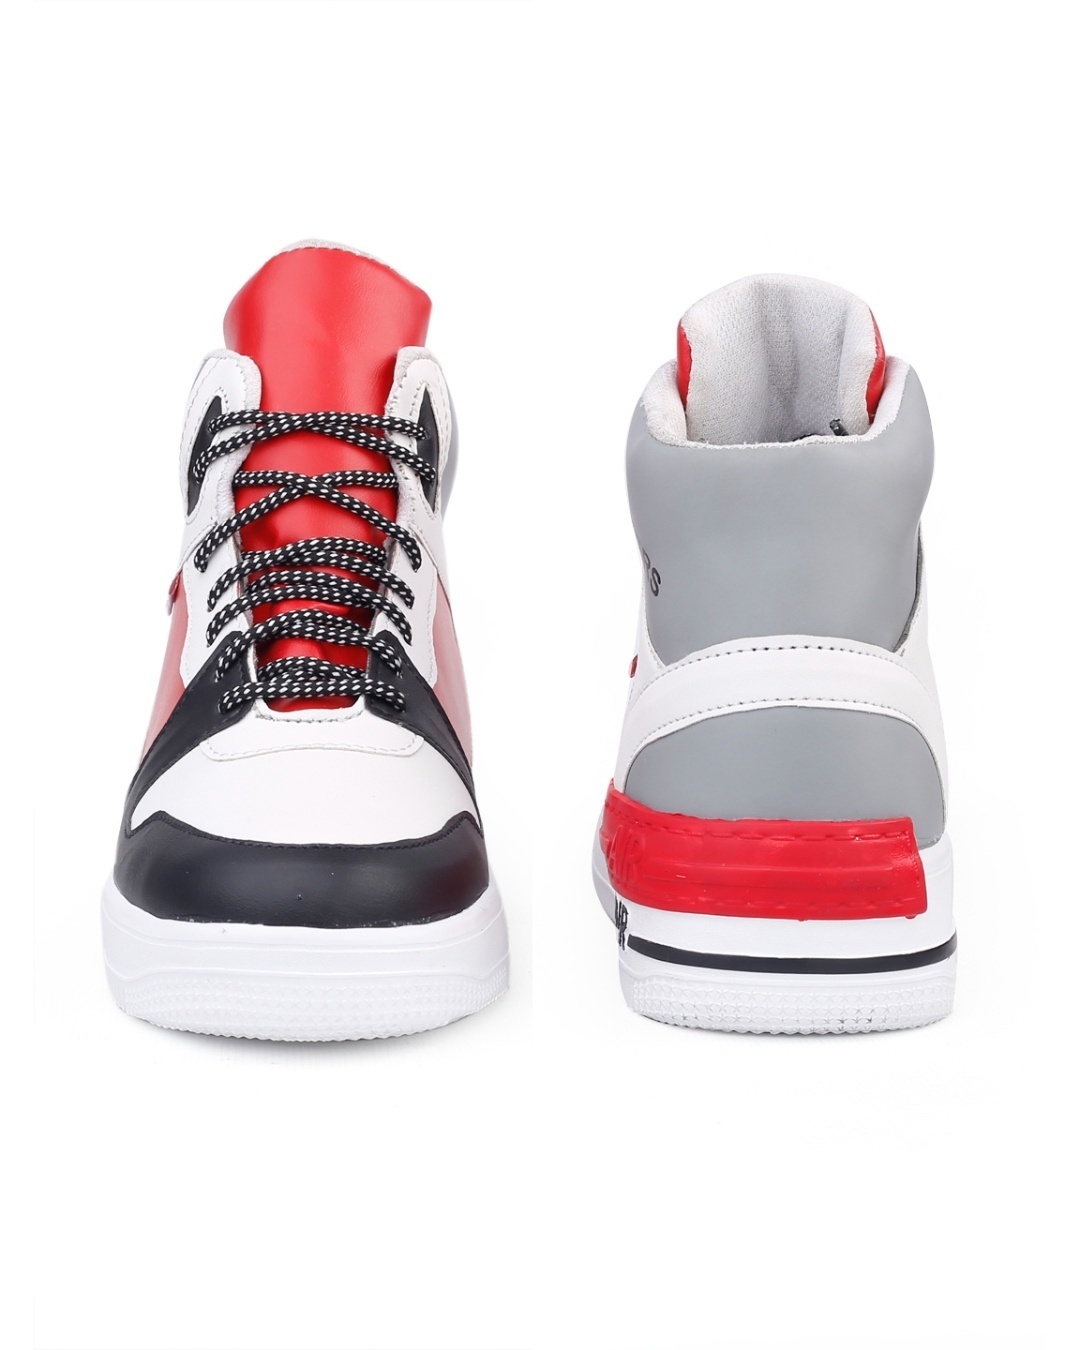 Shop Men's Red and White Color Block Casual Shoes